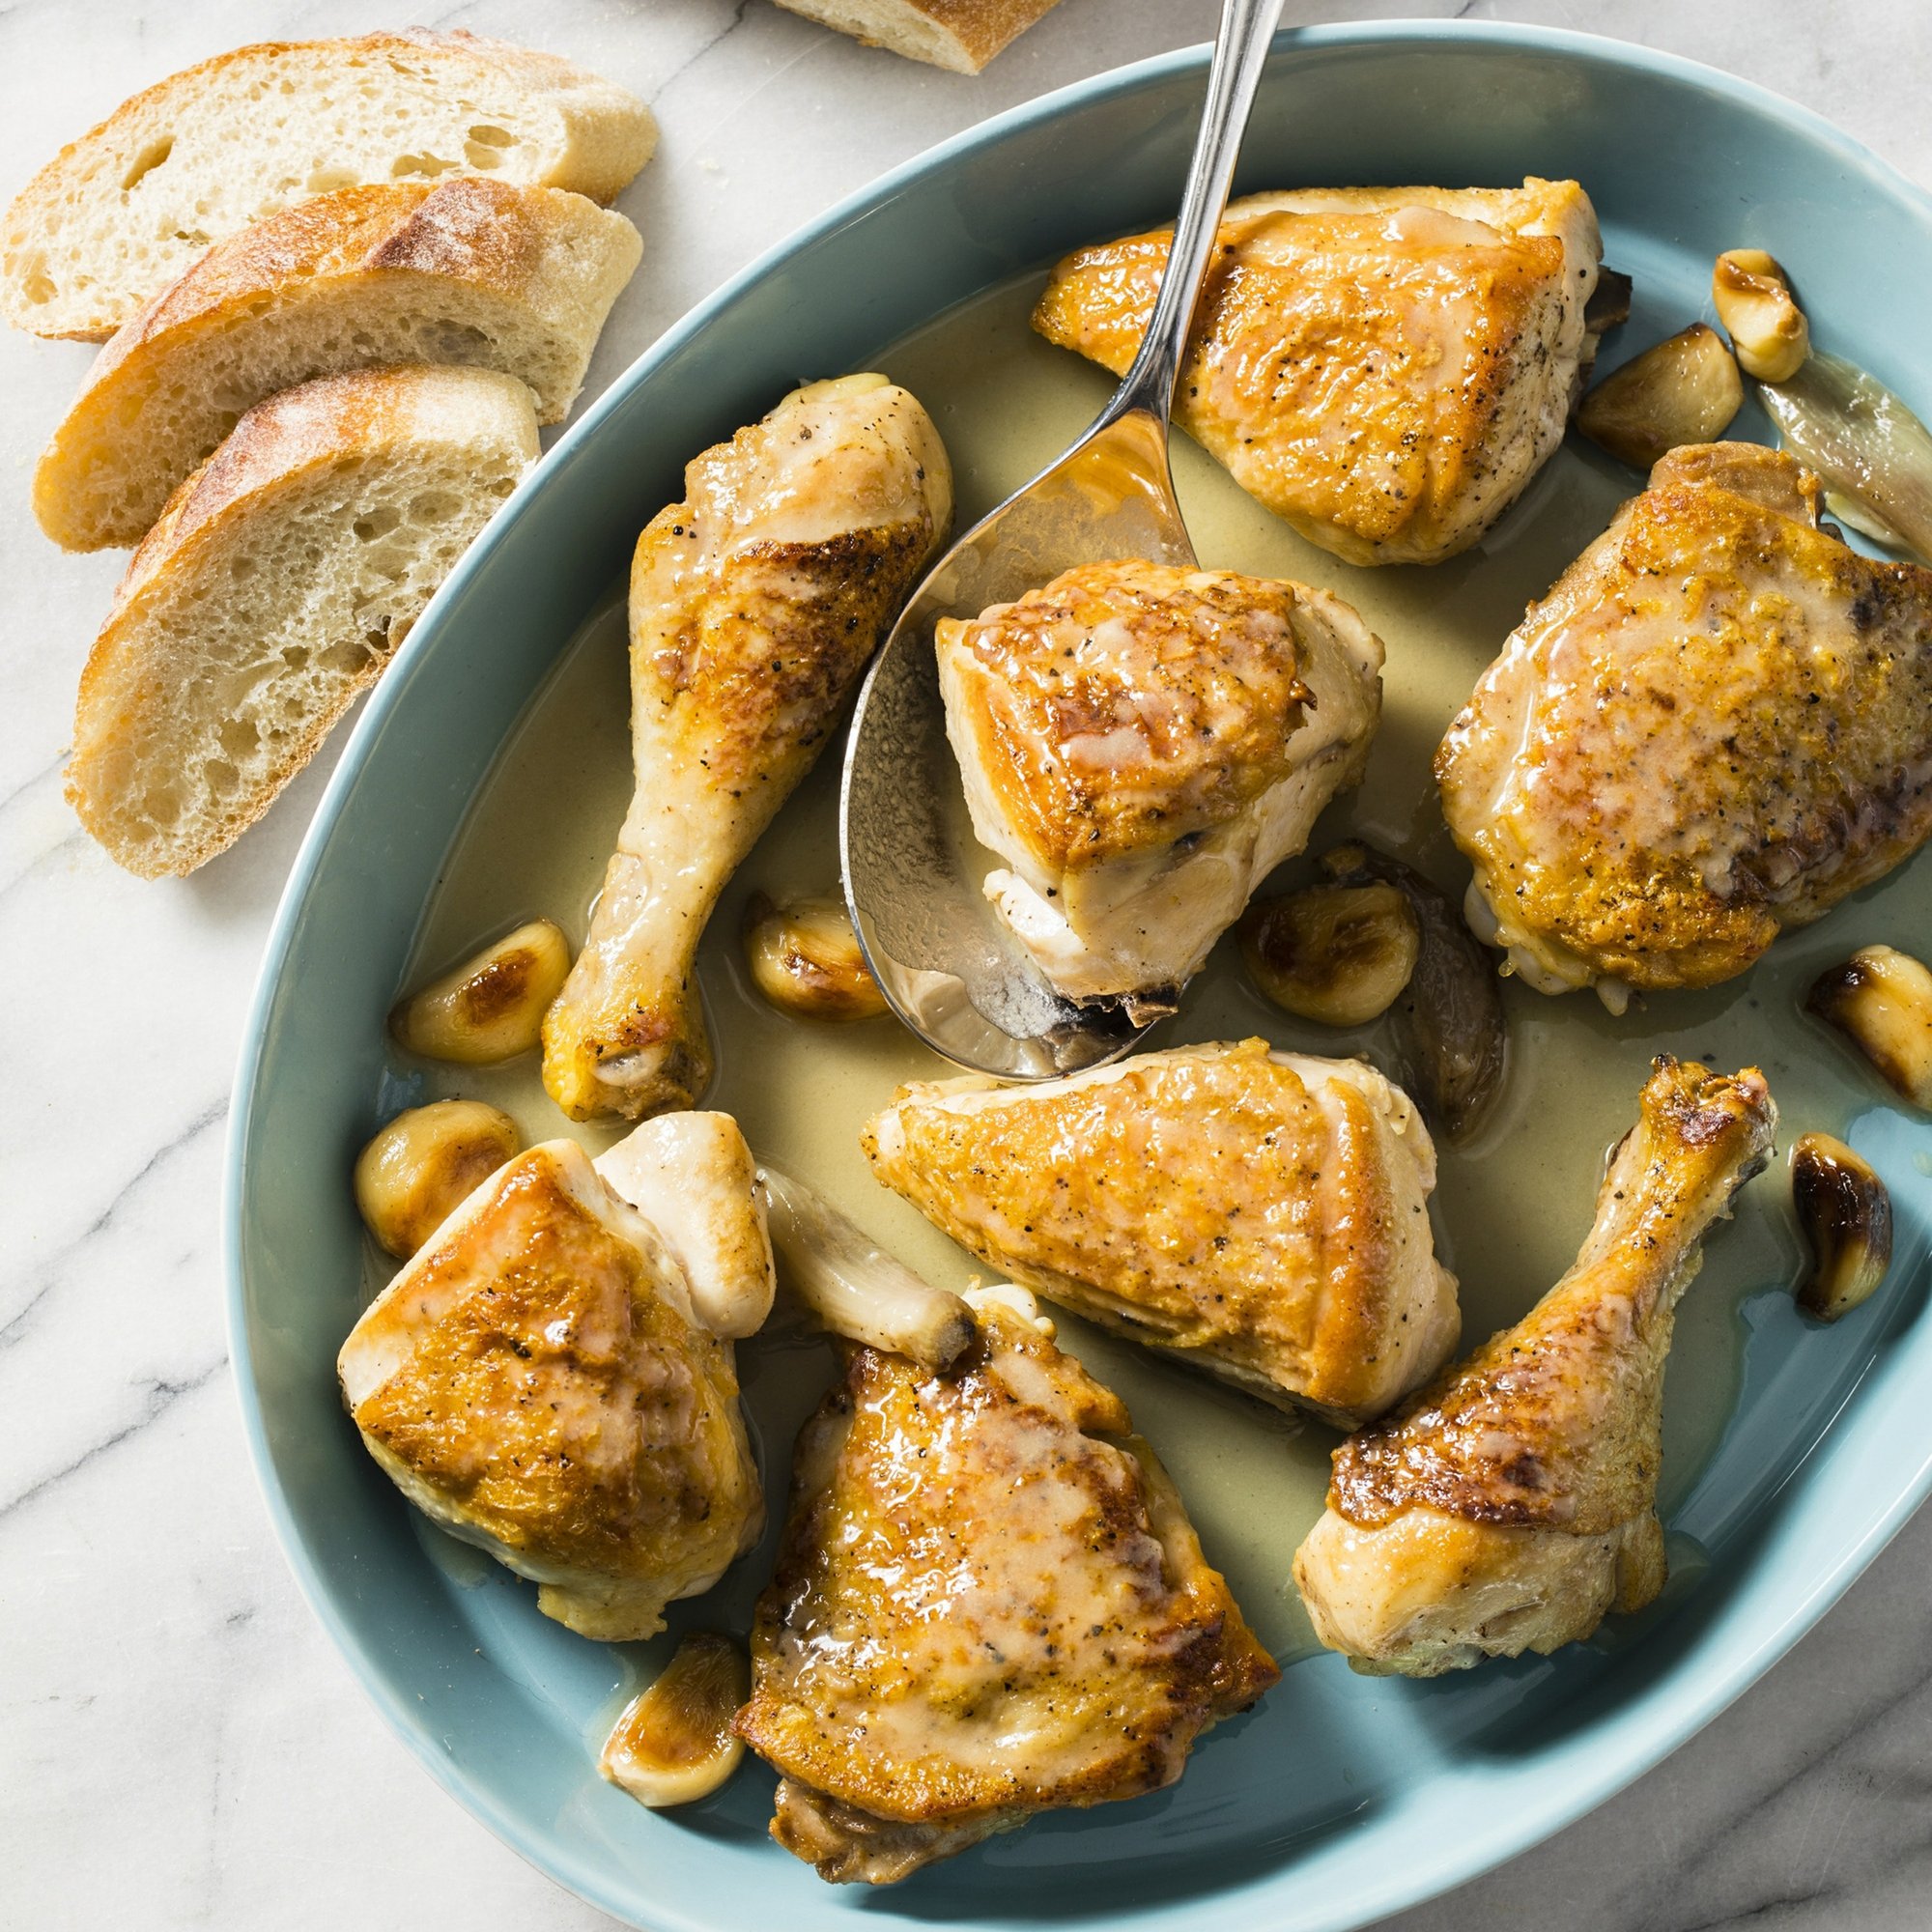 My City - A full-flavored chicken dish with sweet and nutty garlic